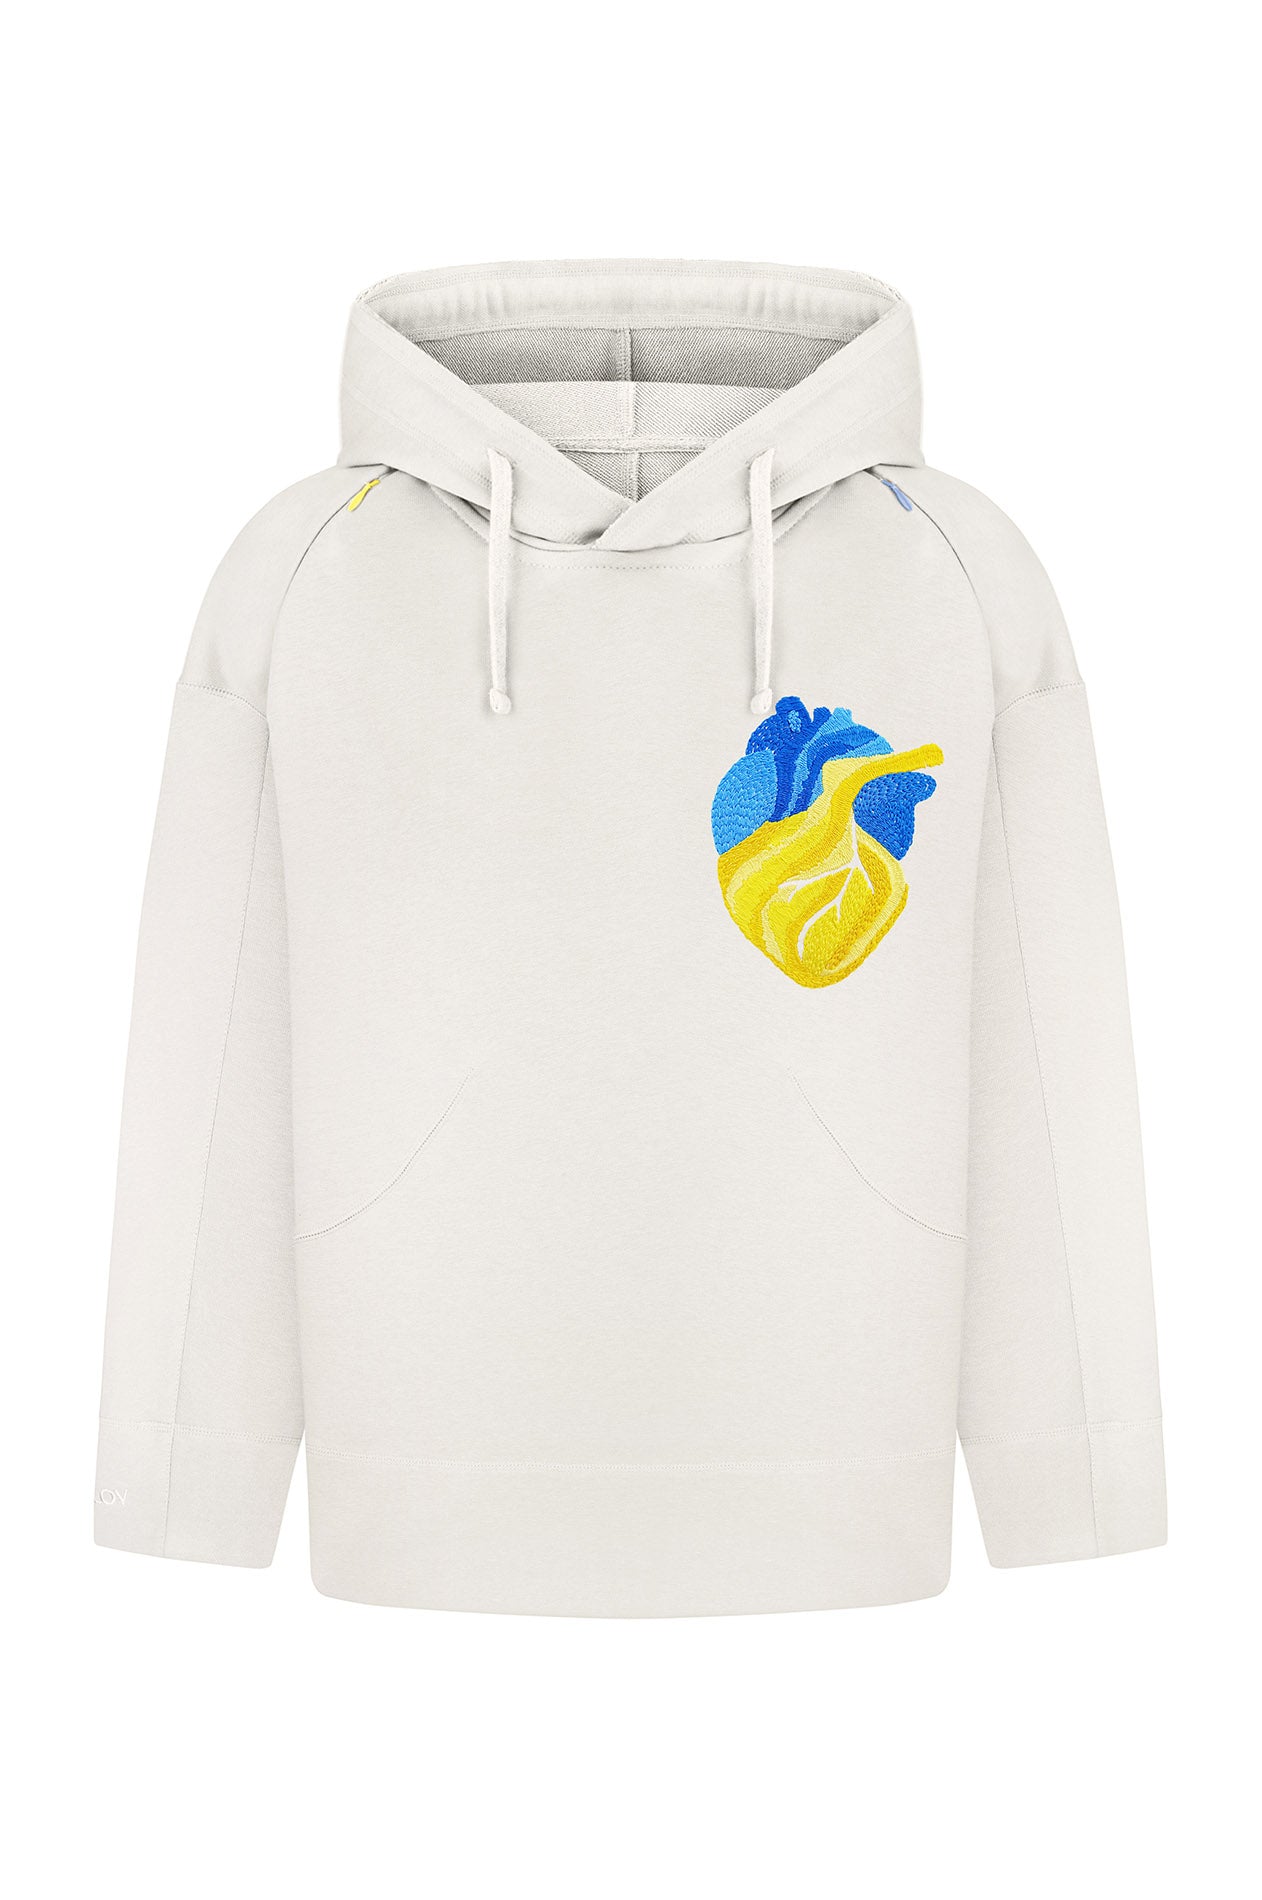 Milky hoodie with handmade heart embroidery